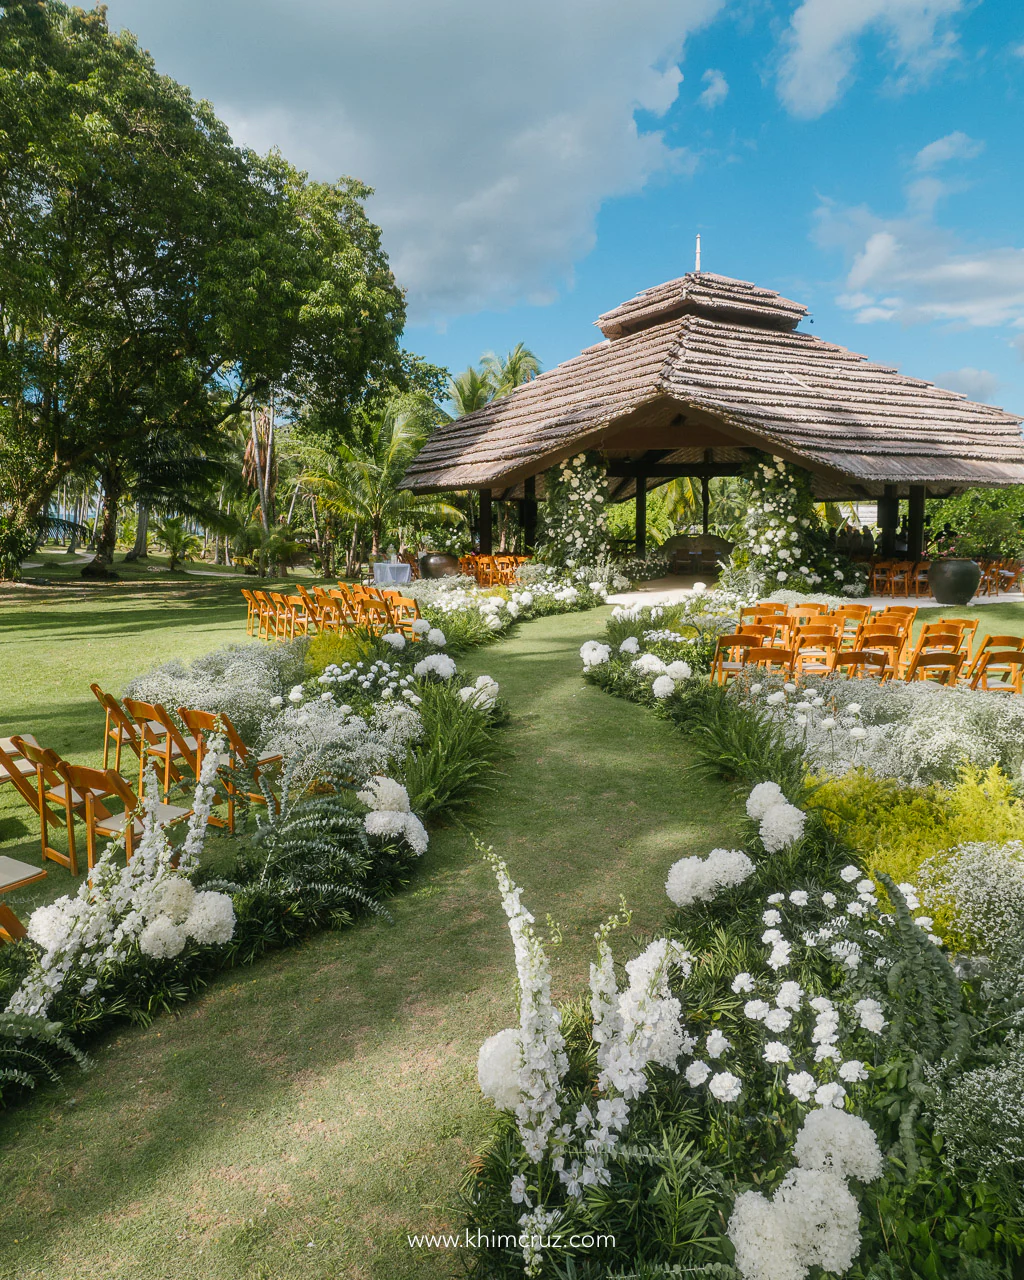 Malipano island wedding ceremony amidst a picturesque field adorned with flowers by Khim Cruz